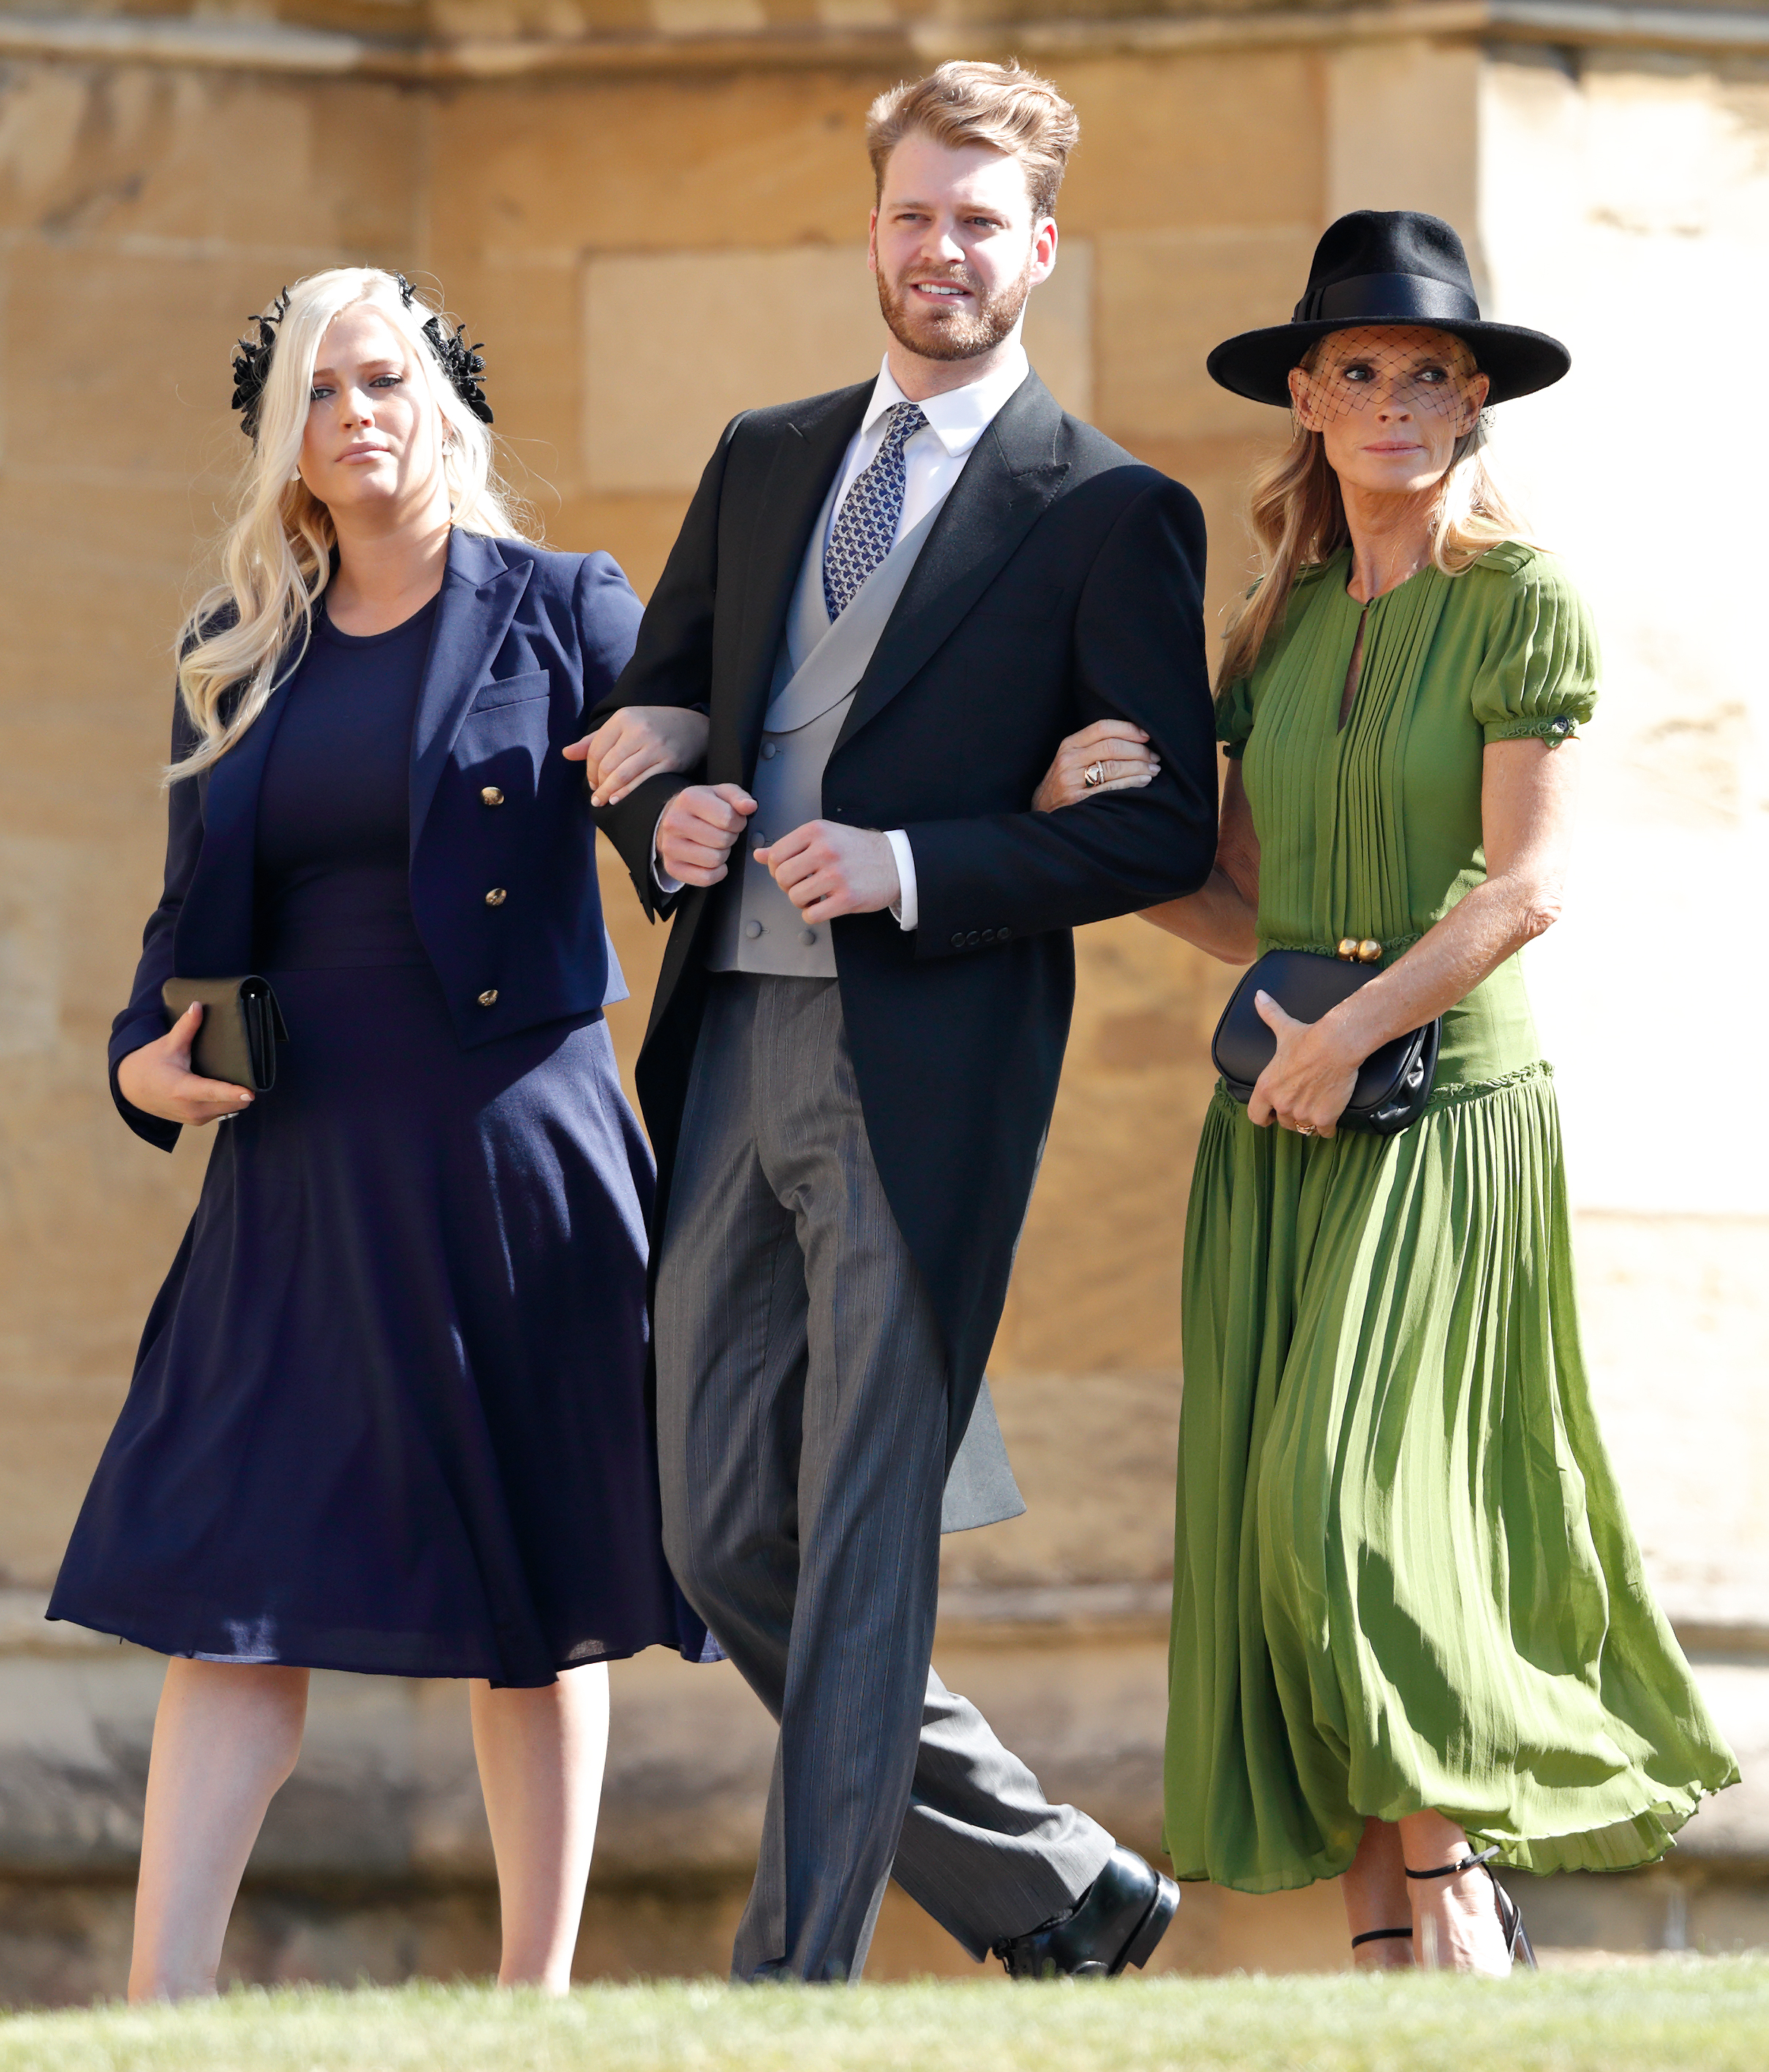 Lady Eliza Spencer, Louis Spencer and Victoria Aitken attend the wedding of Prince Harry and Meghan Markle at St George's Chapel, Windsor Castle on May 19, 2018 in Windsor, England. | Source: Getty Images